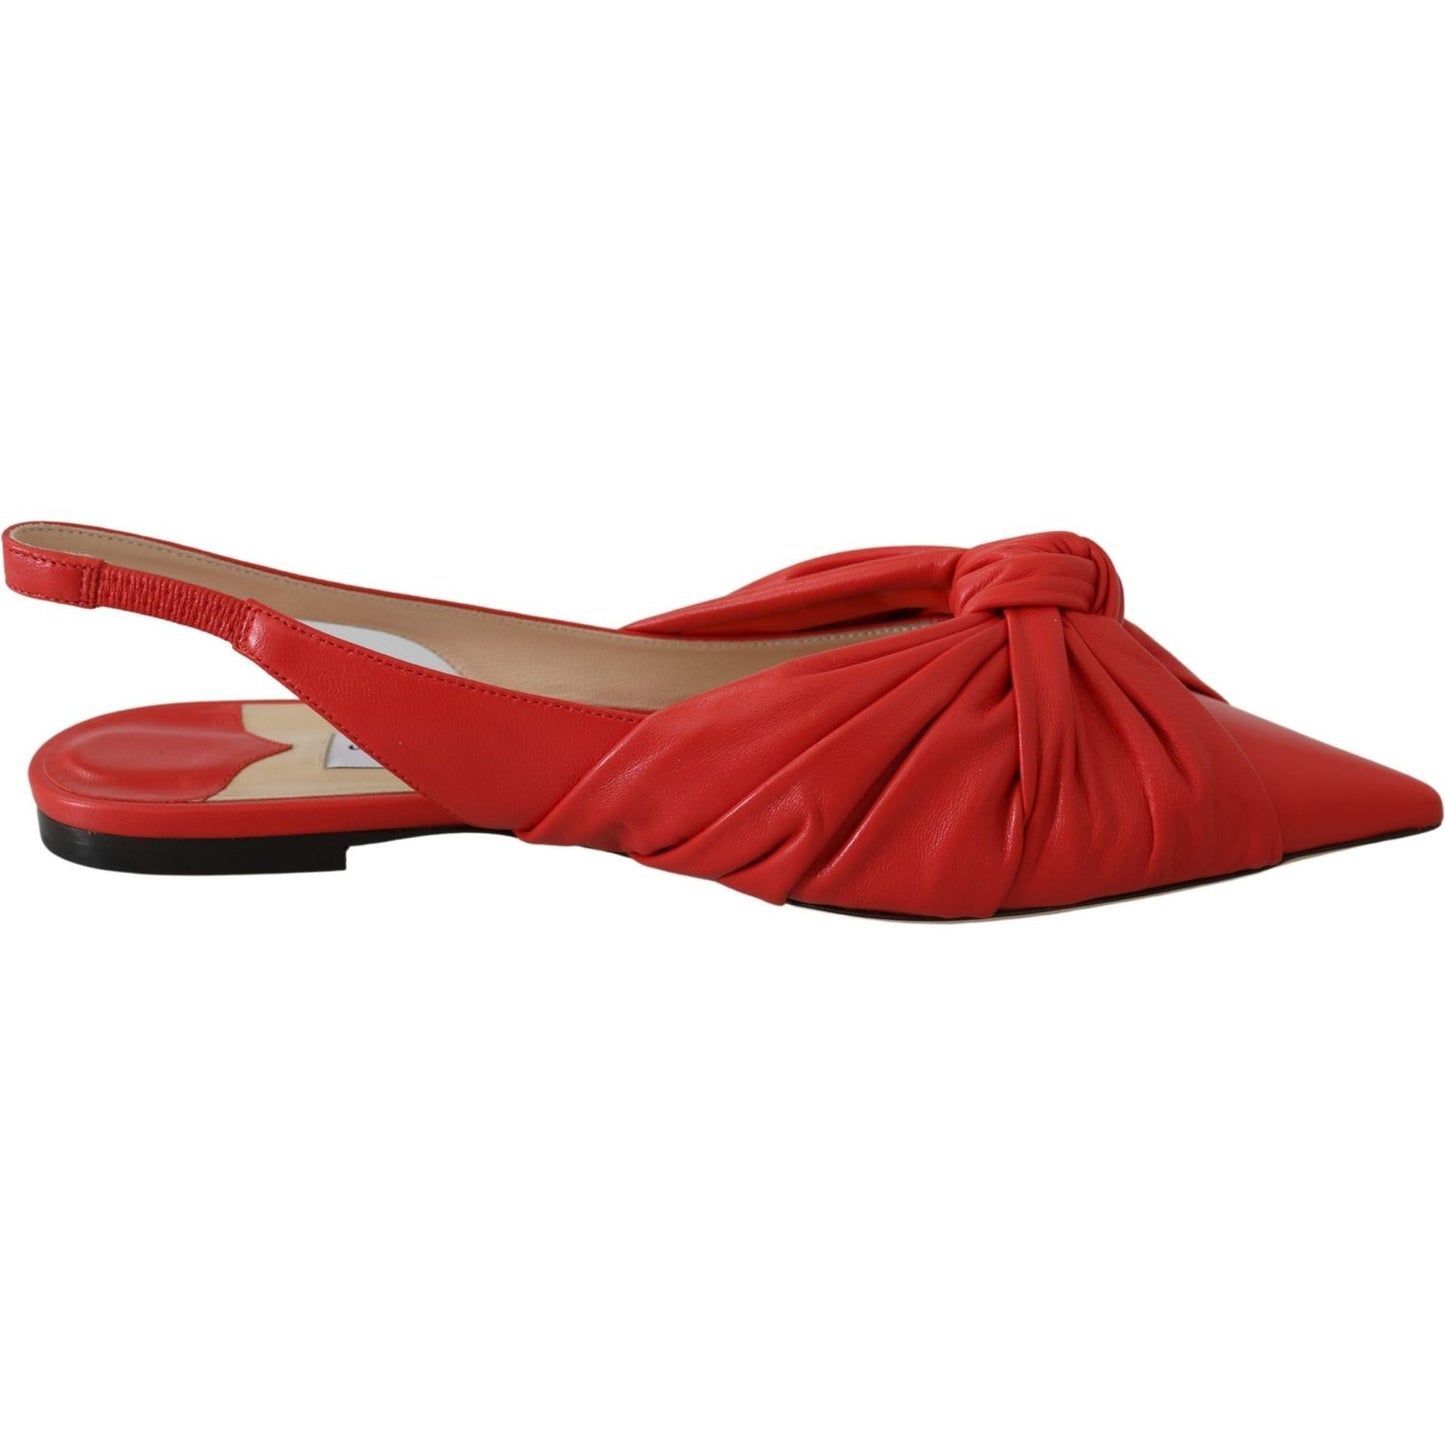 Jimmy Choo Chic Red Pointed Toe Leather Flats Shoes annabell-flat-nap-chilli-leather-flat-shoes